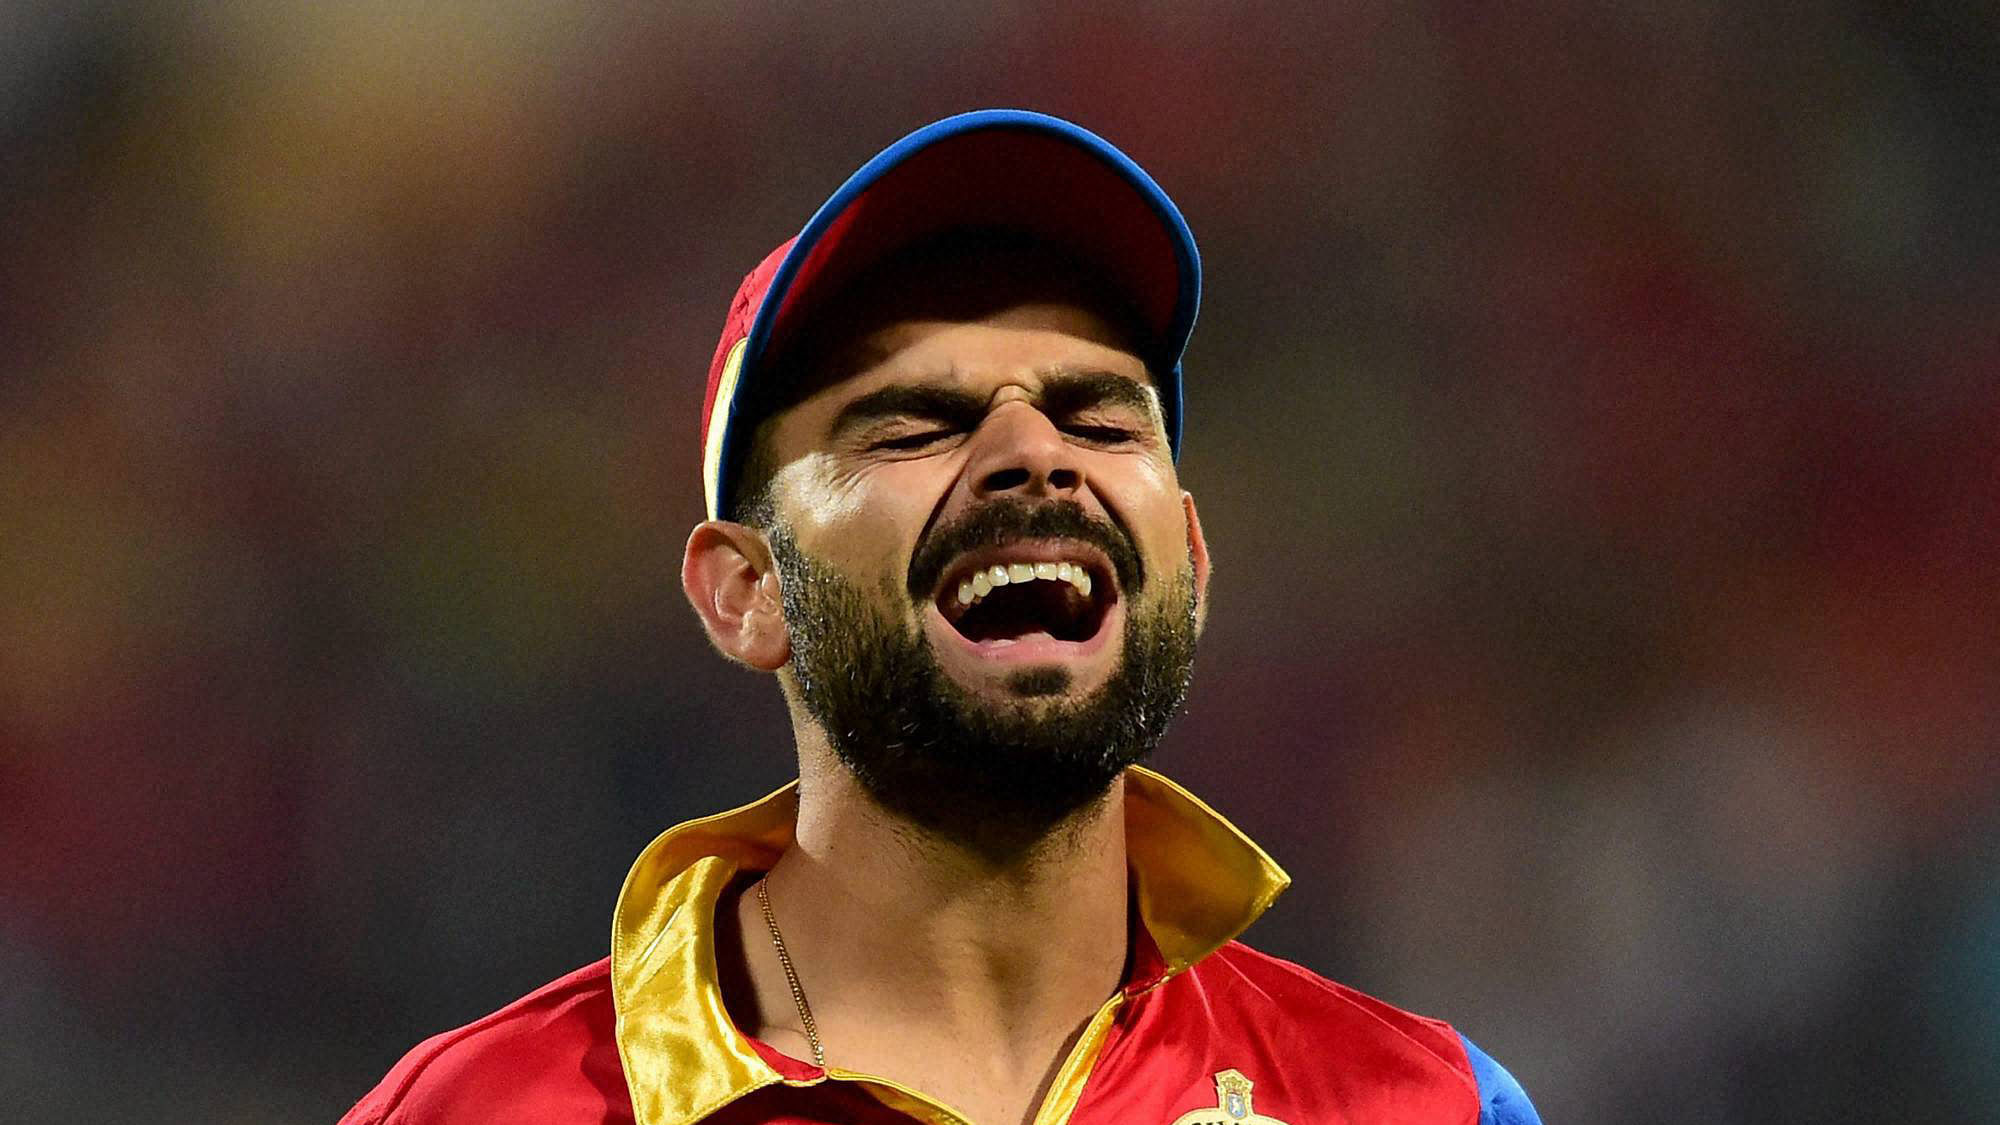 IPL 2020 Royal Challengers Banglore (RCB) Players: Virat Kohli is set to lead Royal Challengers Bangalore for yet another season.